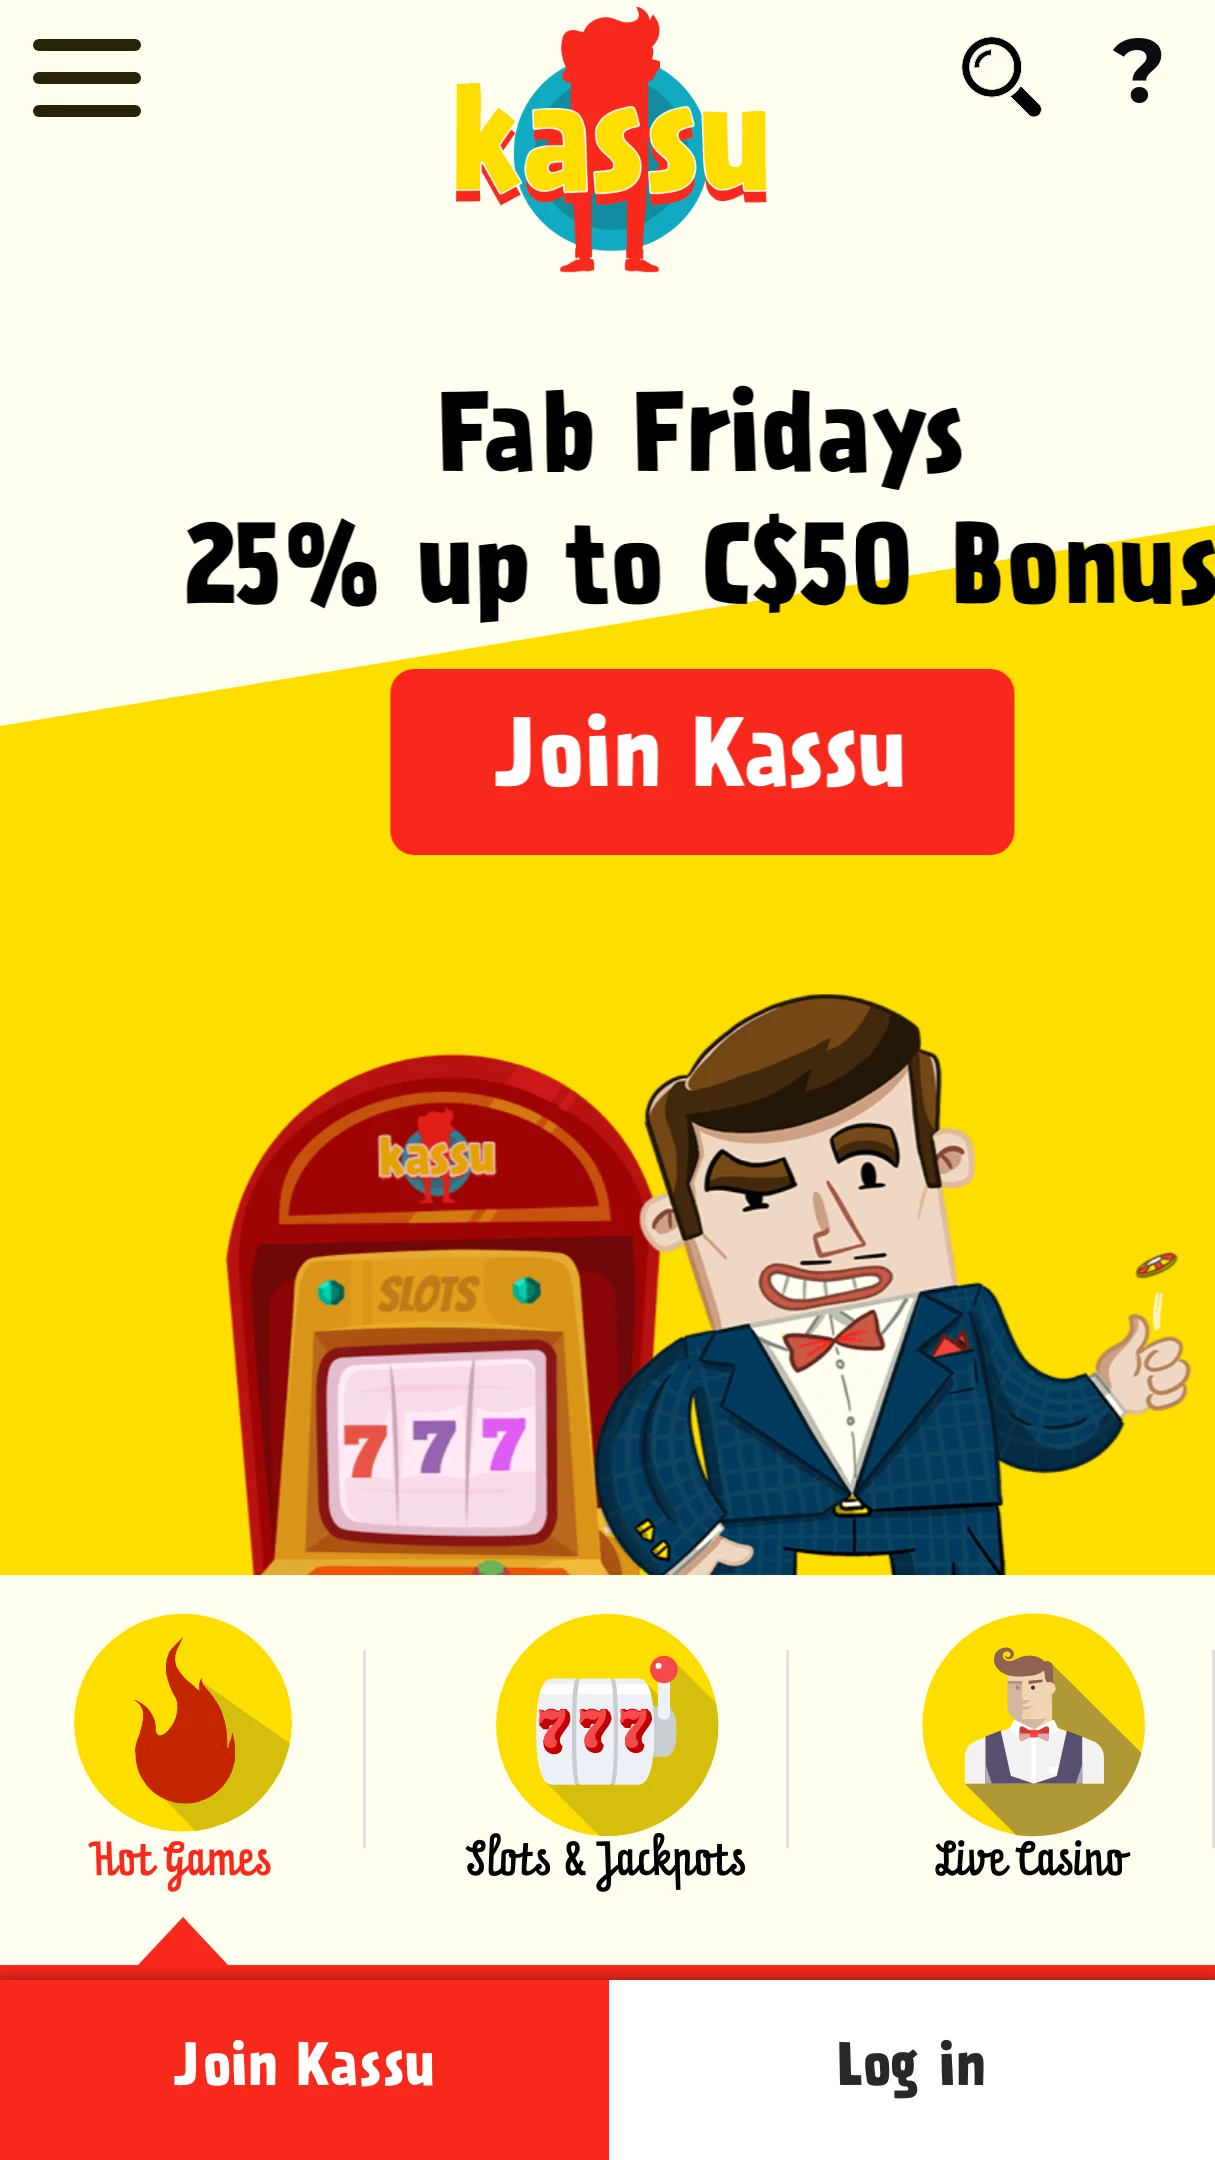 Crazy kassu slots: Lessons From The Pros